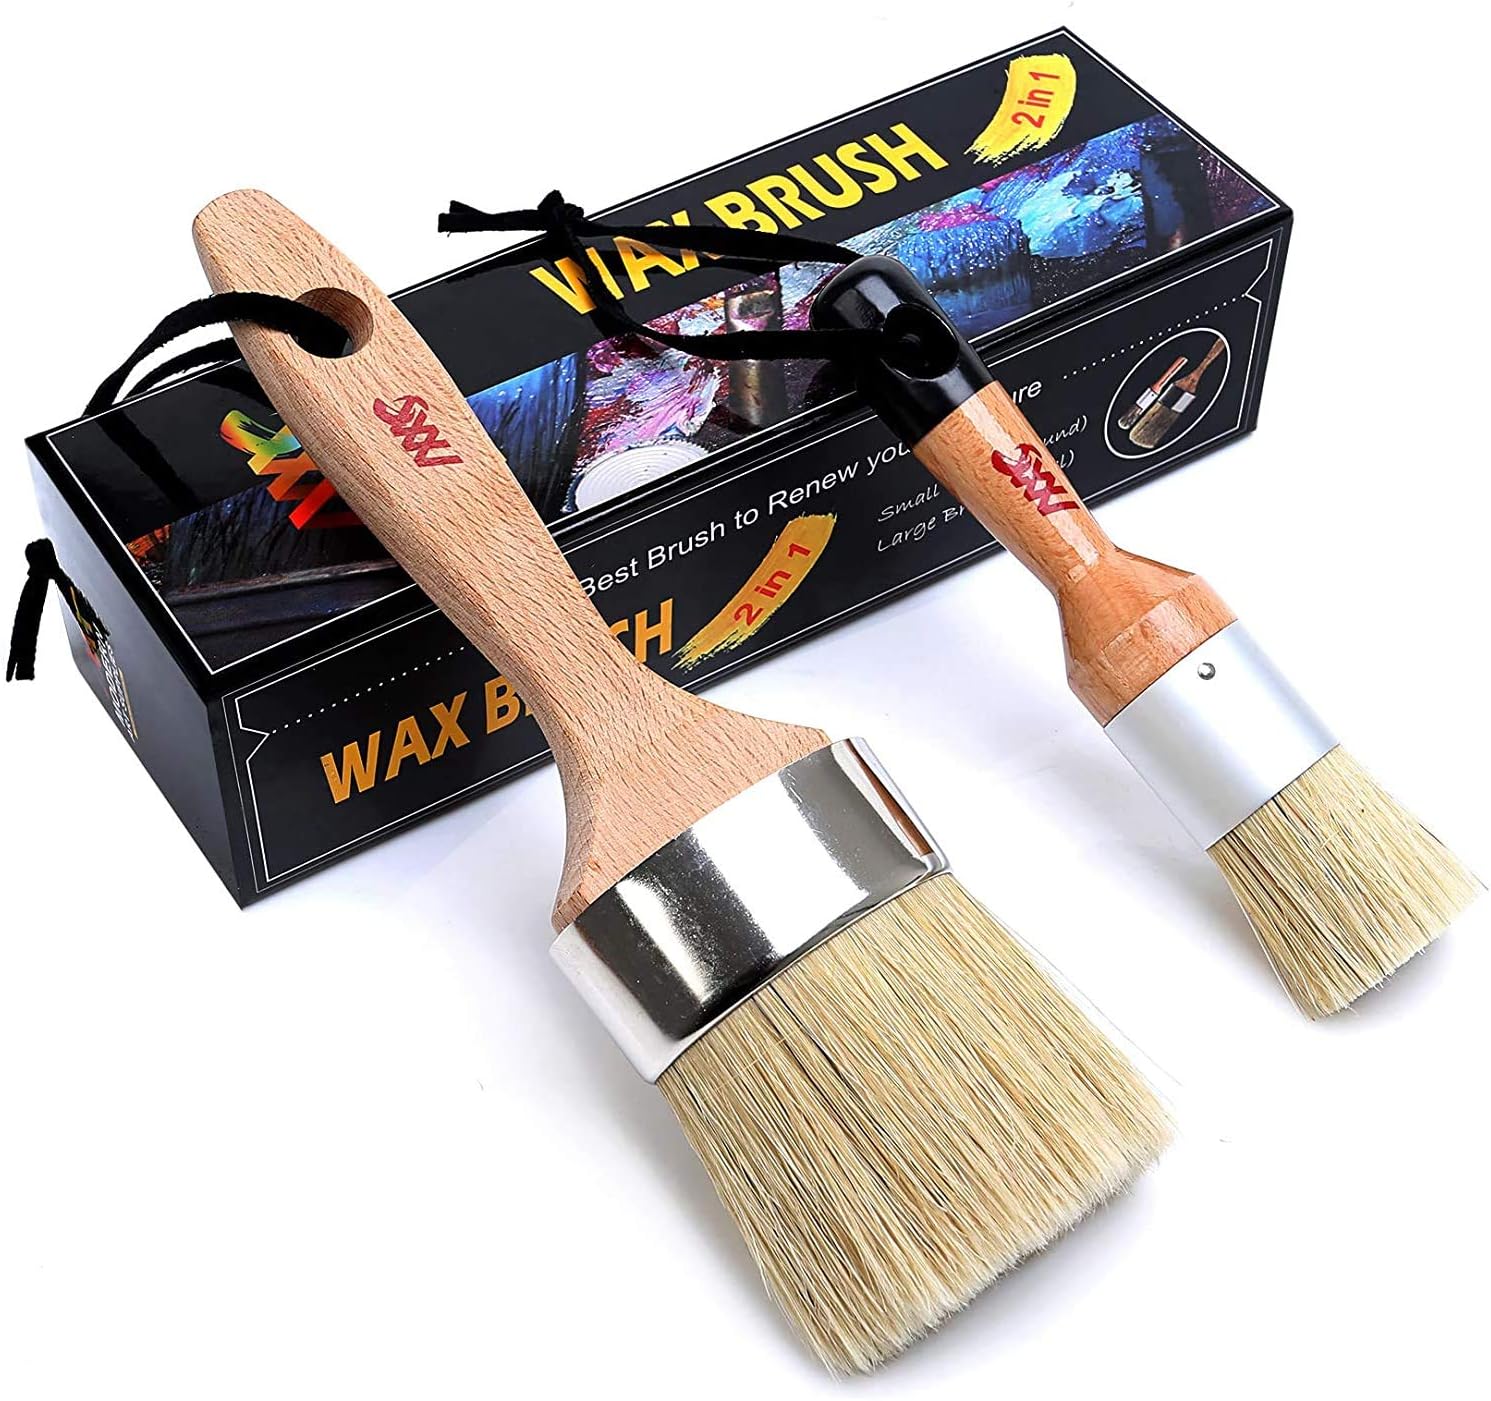 Chalk and Wax Paint Brush Furniture Set- Painting or [...]